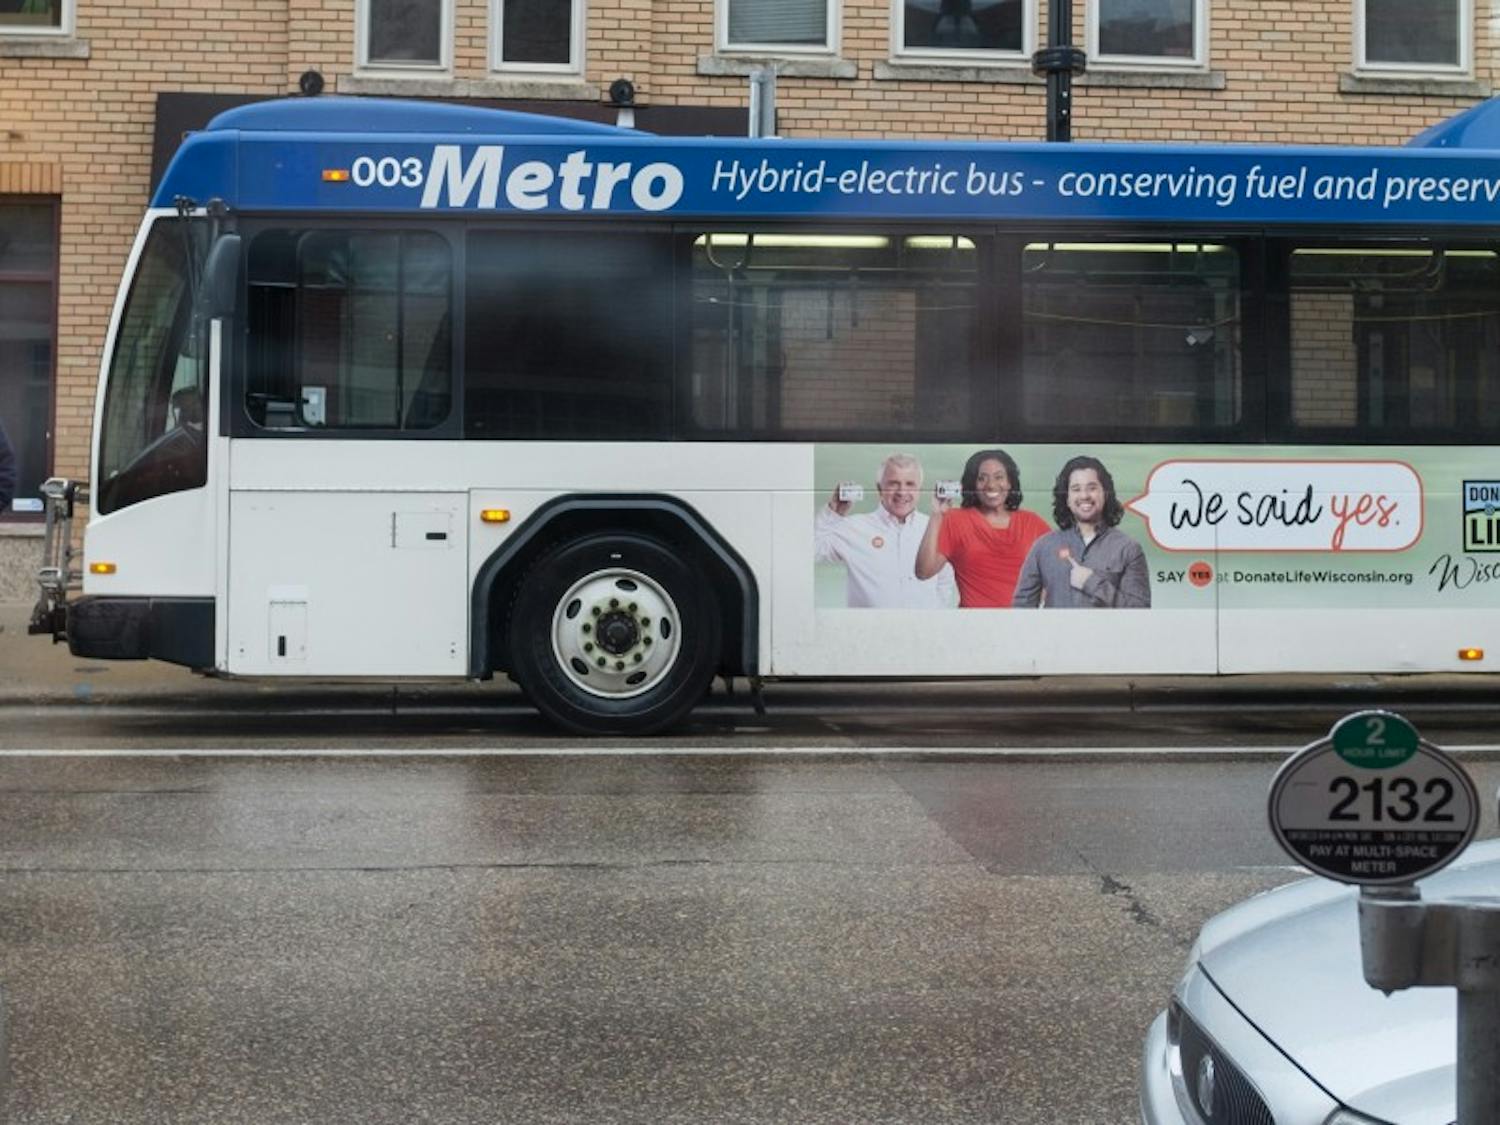 Overcrowded buses, increasing demand lead city of Madison to apply for federal grant